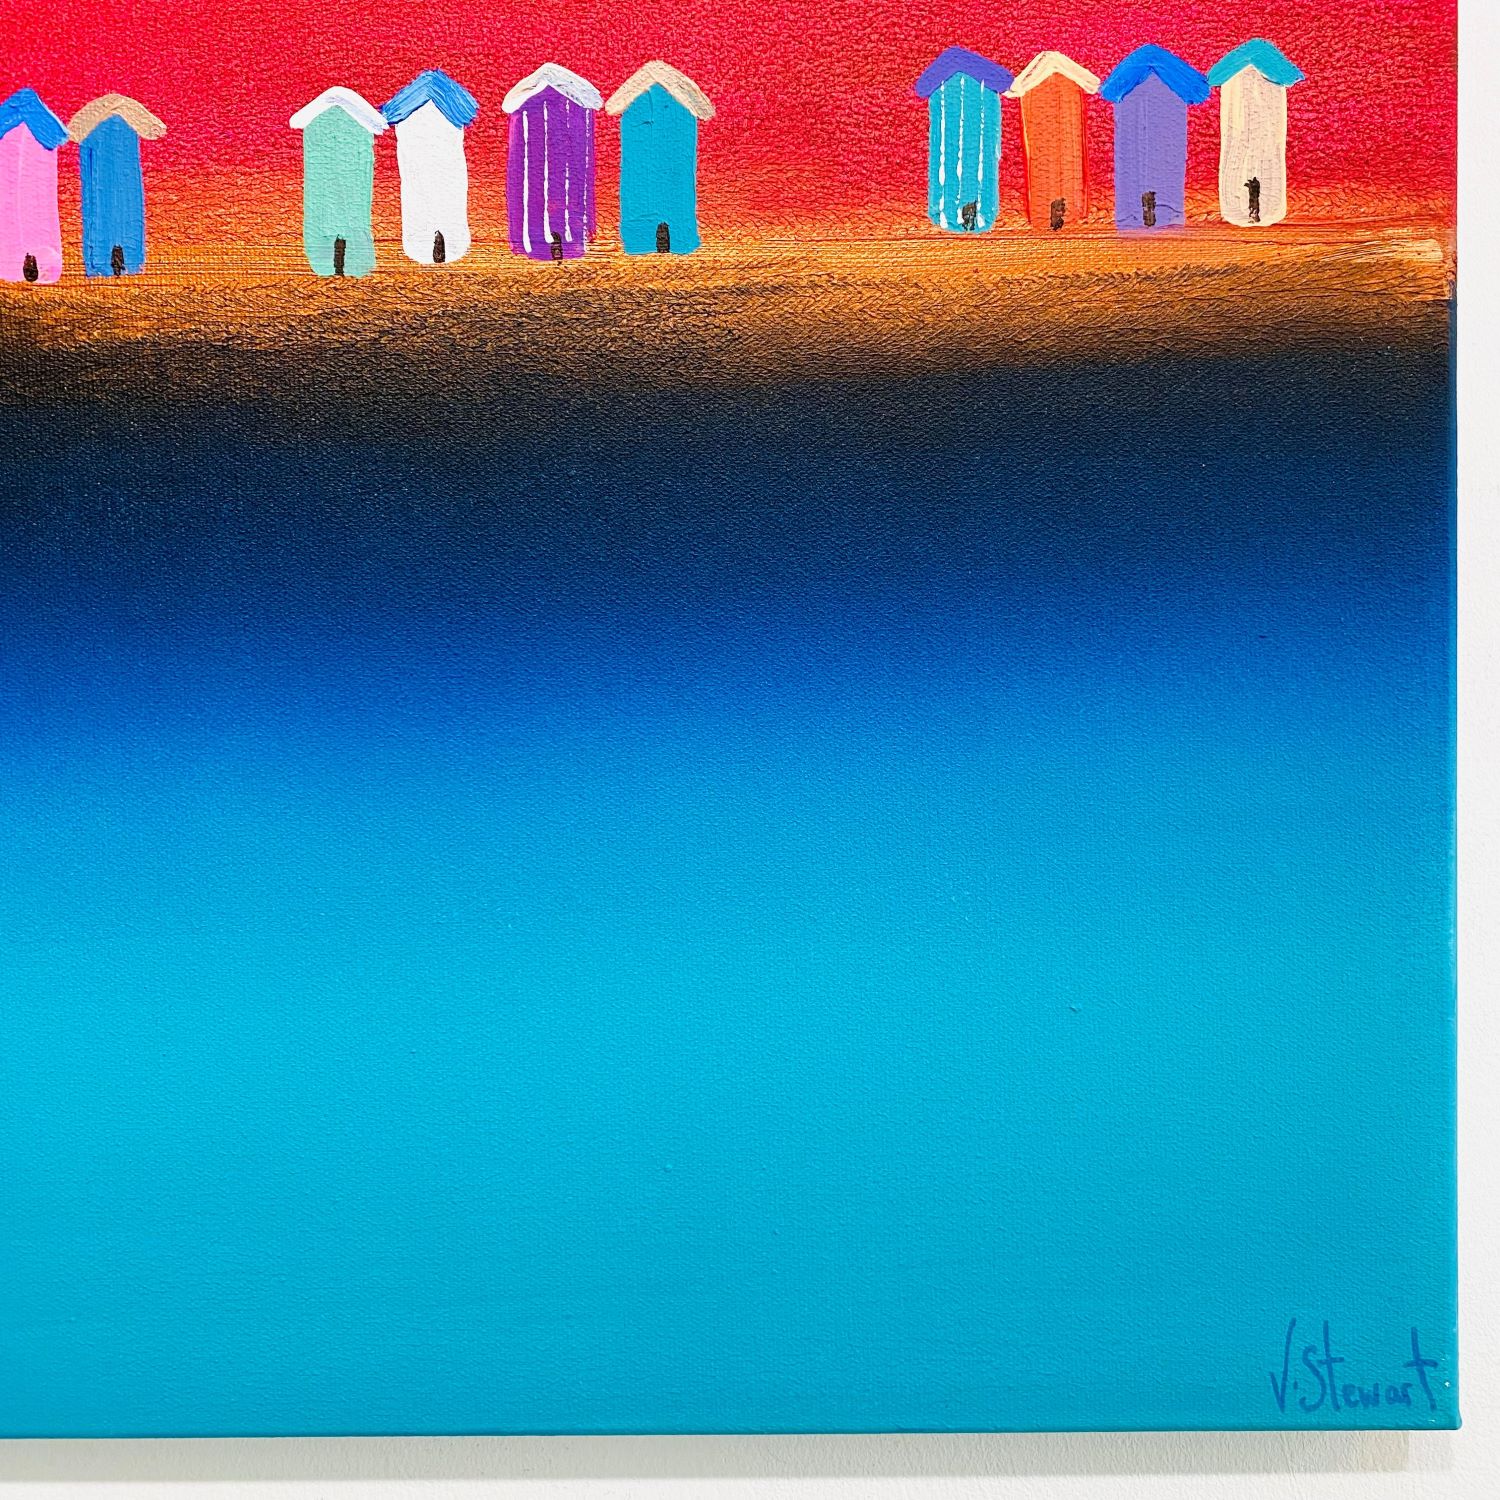 'Huts of Colour' by artist Victoria Stewart